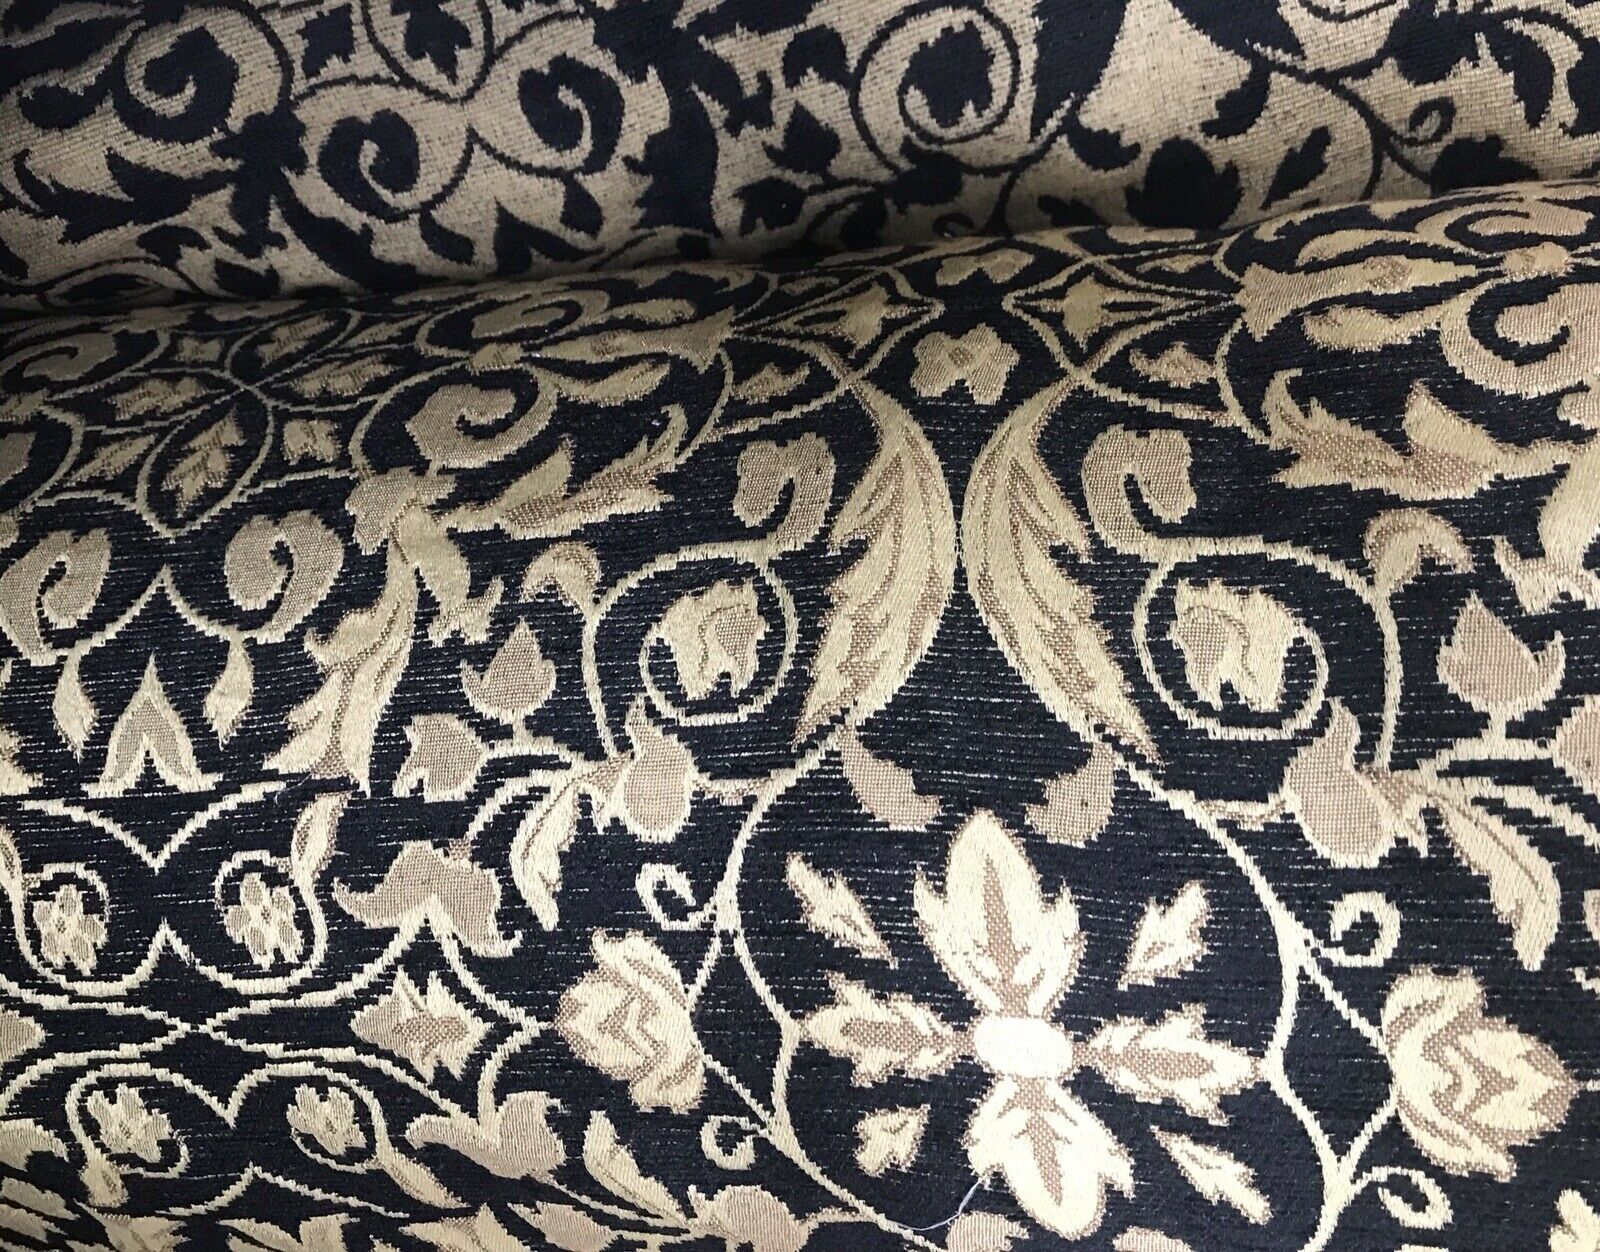 EMBELLISHED A DAMASK BLACK Floral Velvet Upholstery And Drapery Fabric